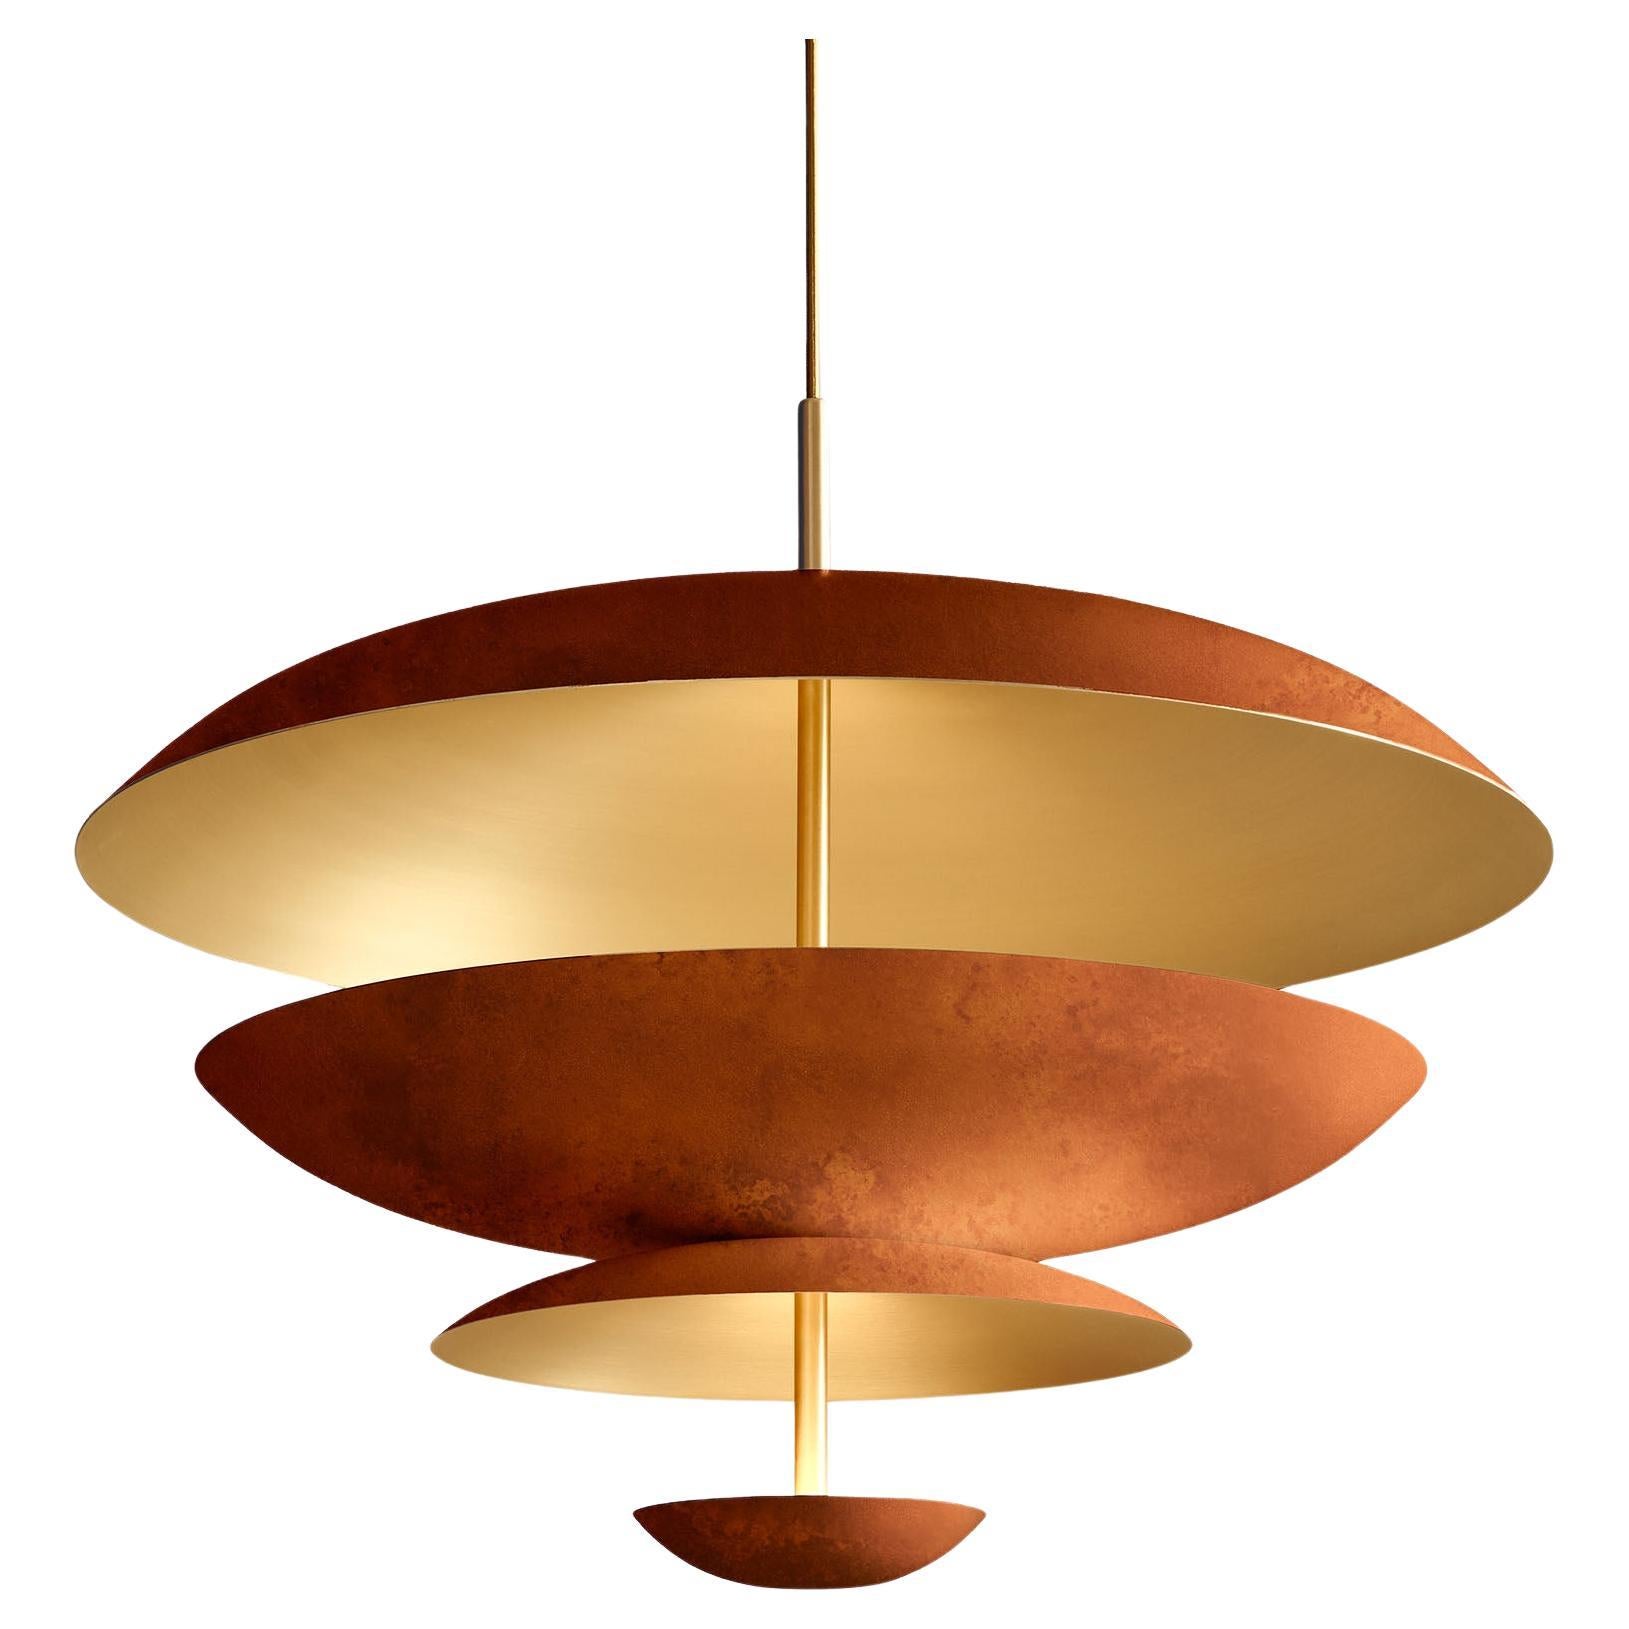 'Cosmic Rust Chandelier 100' Rust Patinated Brass Ceiling Light For Sale